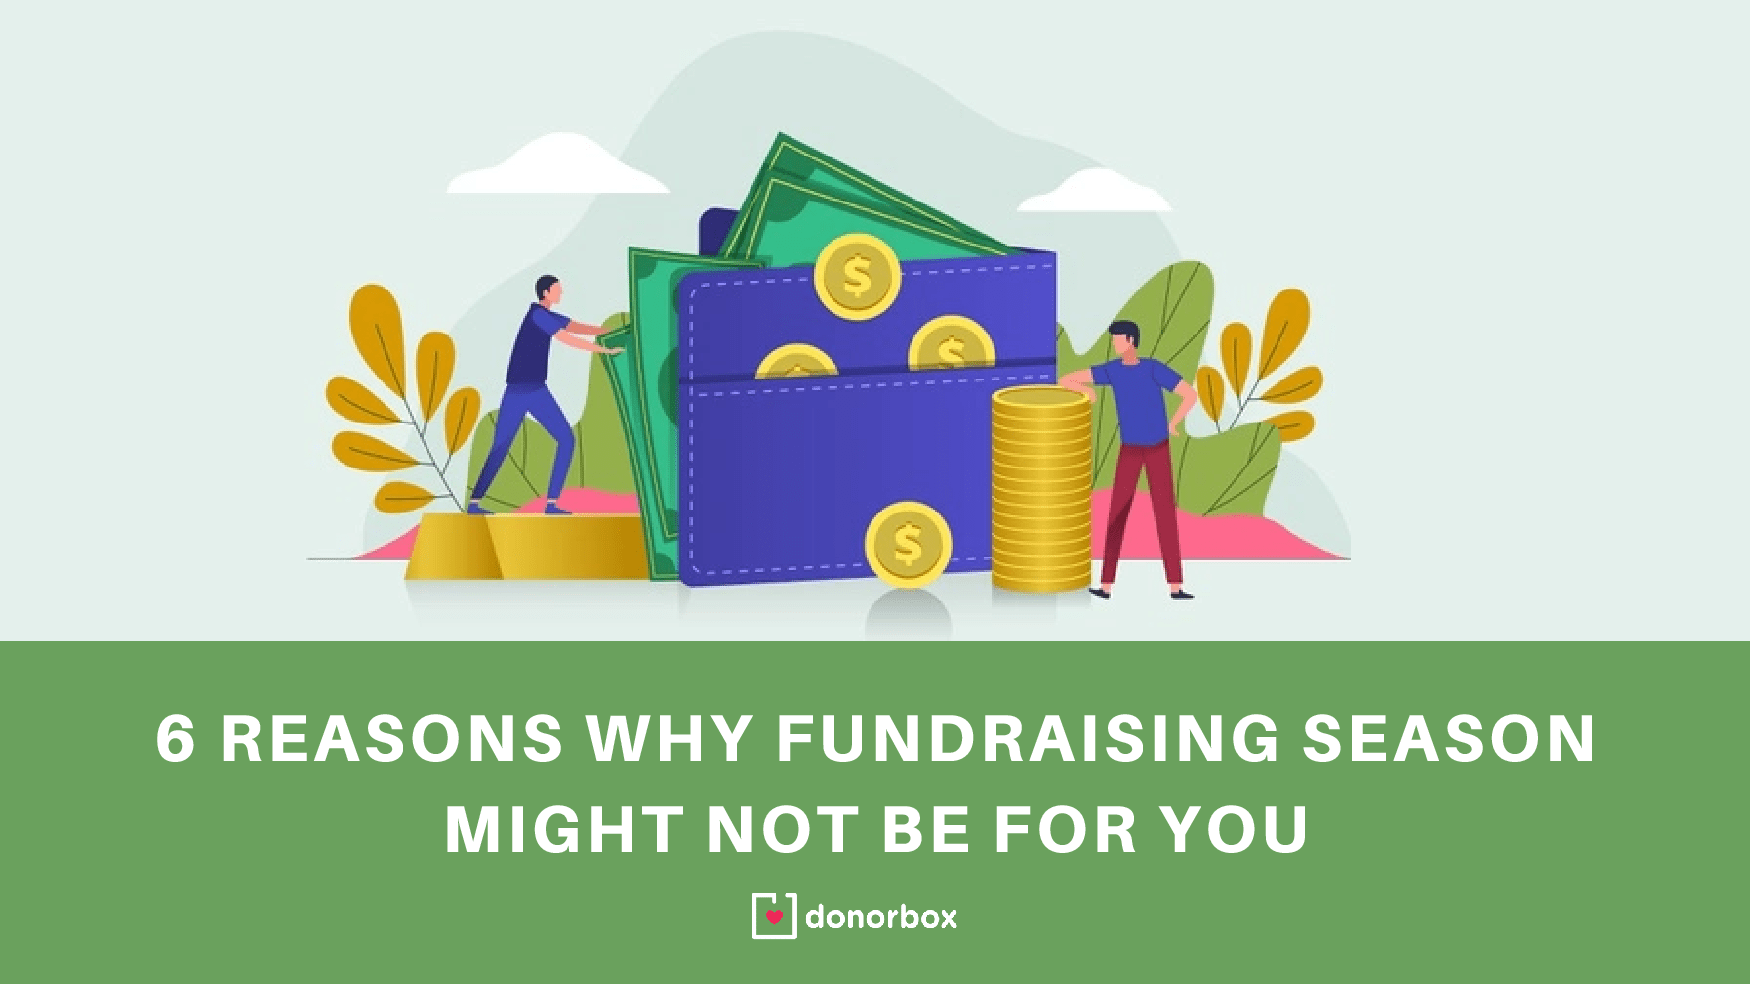 6 Reasons Why Fundraising Season Might Not Be For You